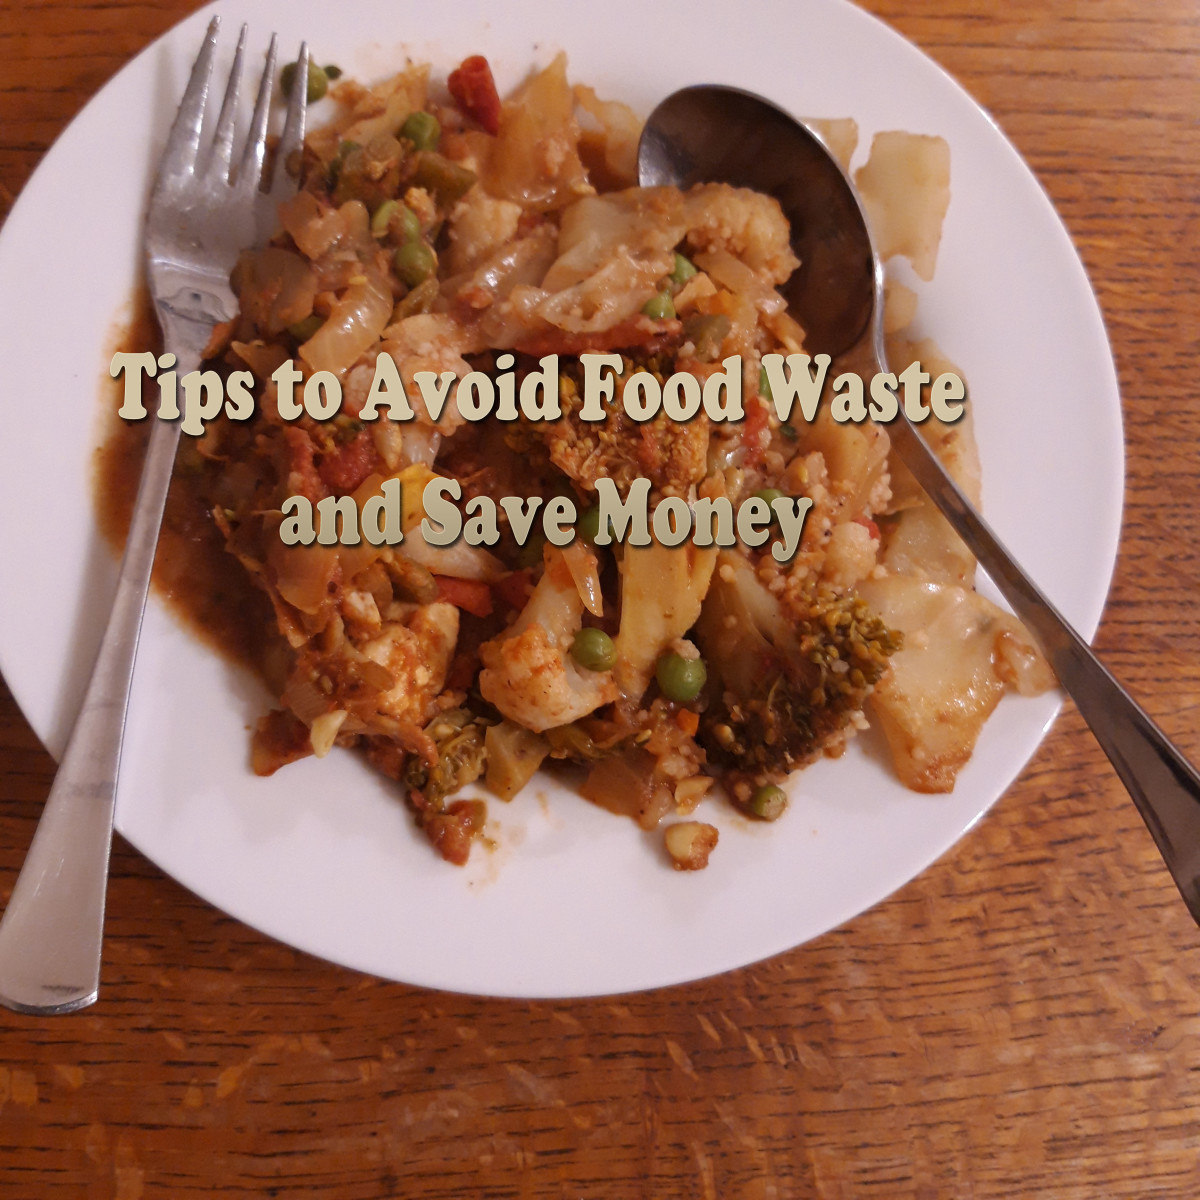 Don't toss those scraps! Save money with these eight tips instead. 